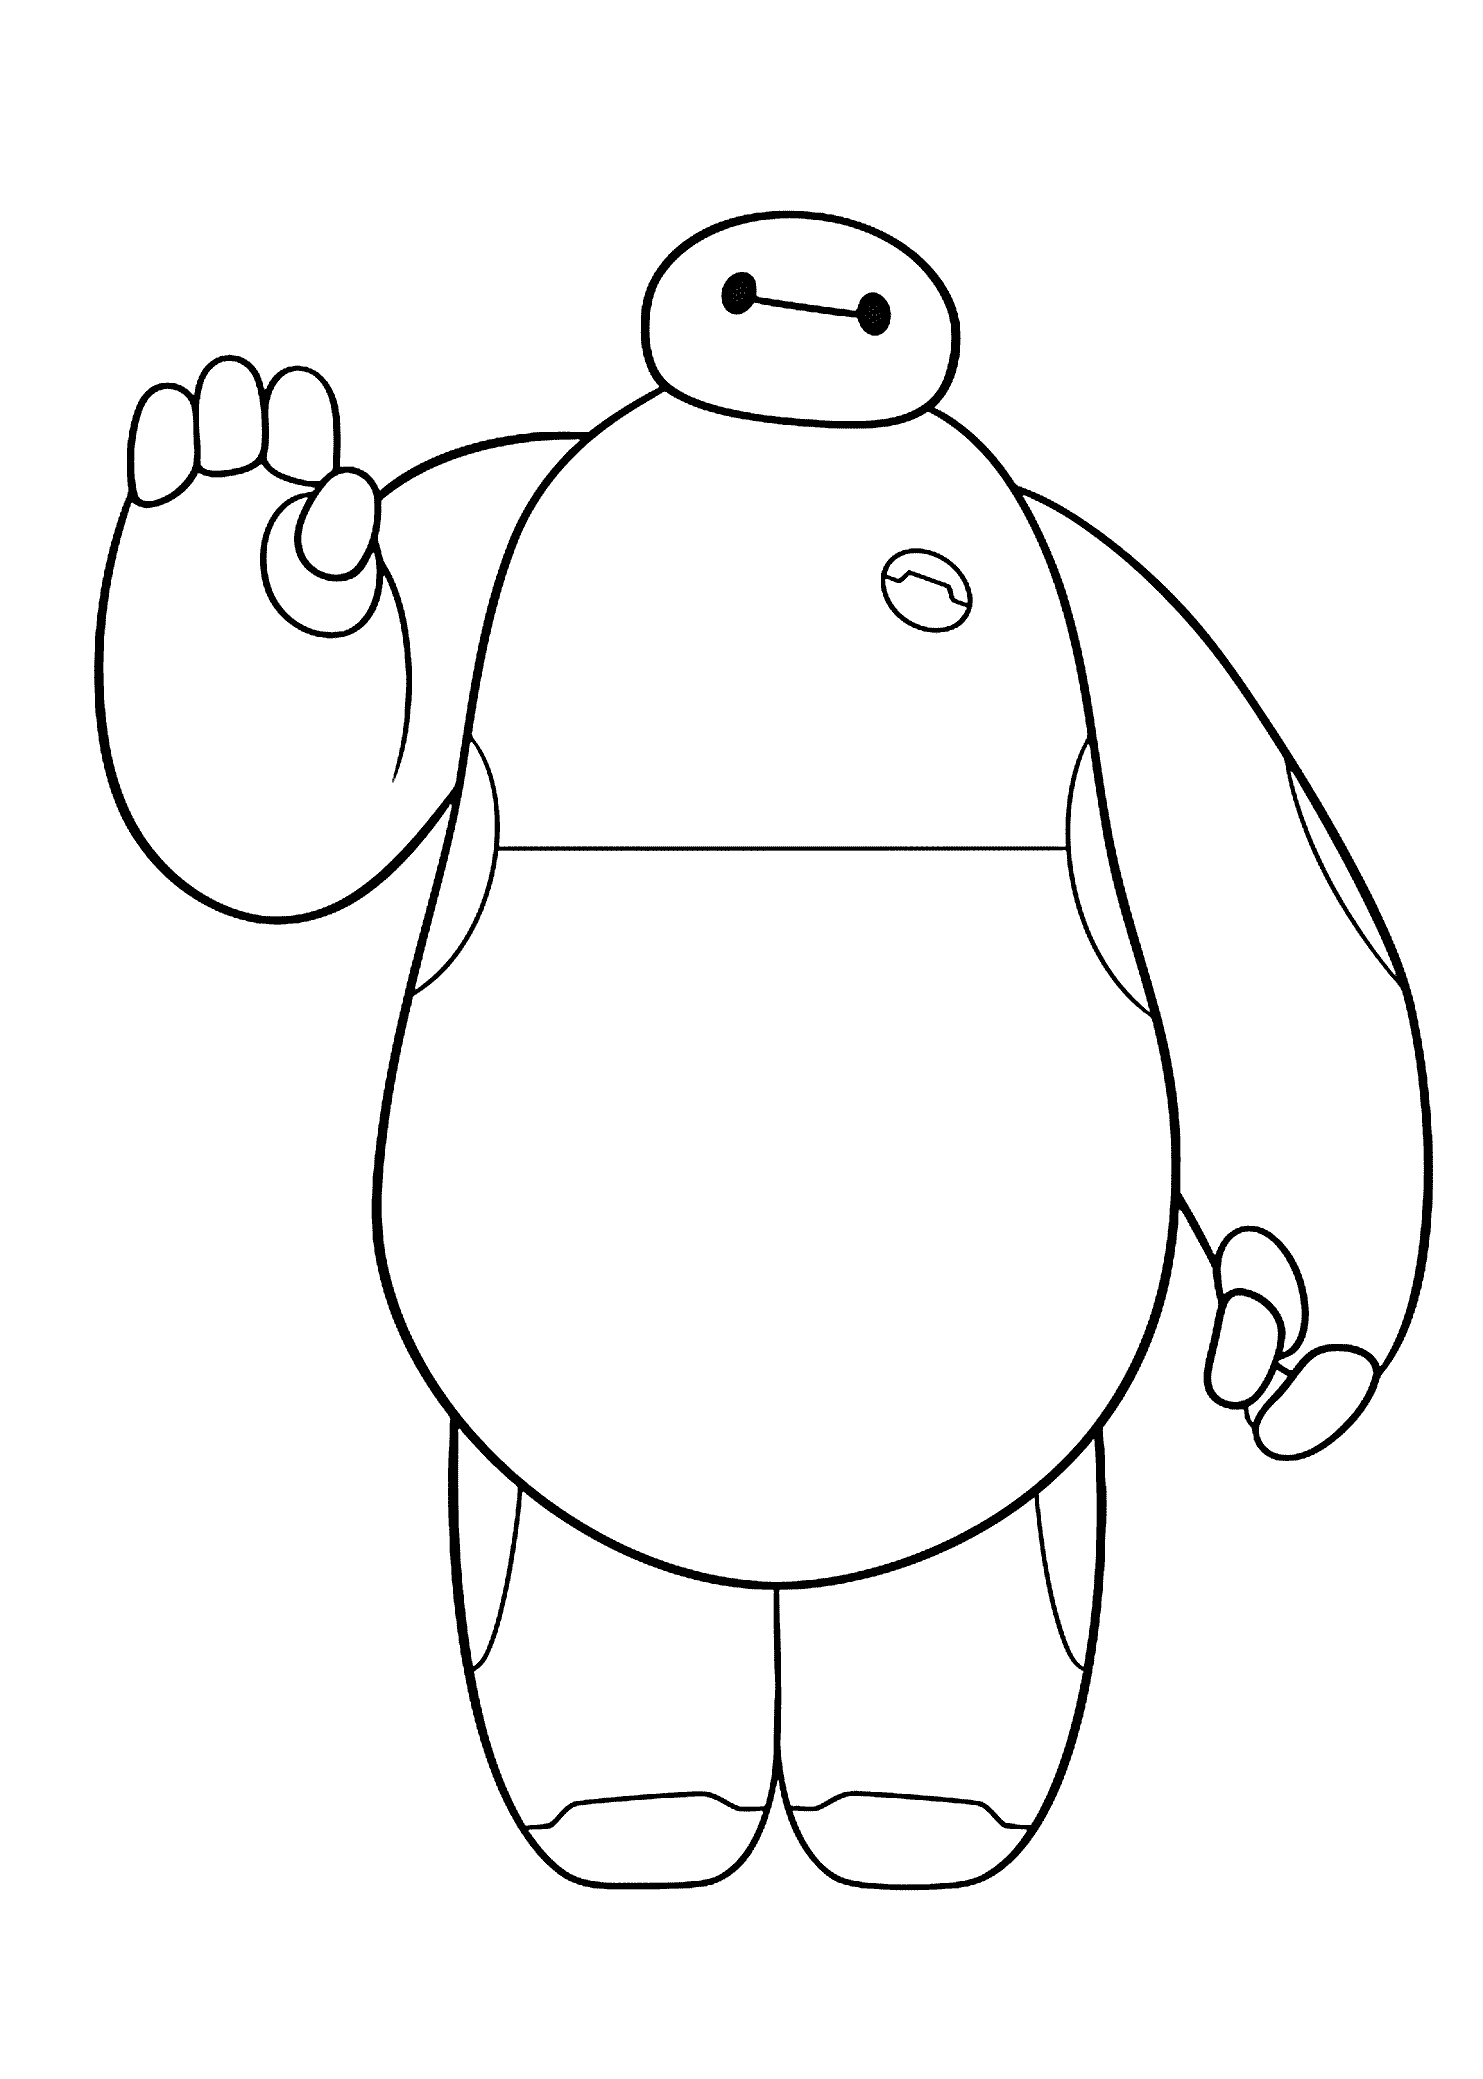 big hero 6 free colouring pages big hero 6 coloring pages to download and print for free big hero free 6 colouring pages 